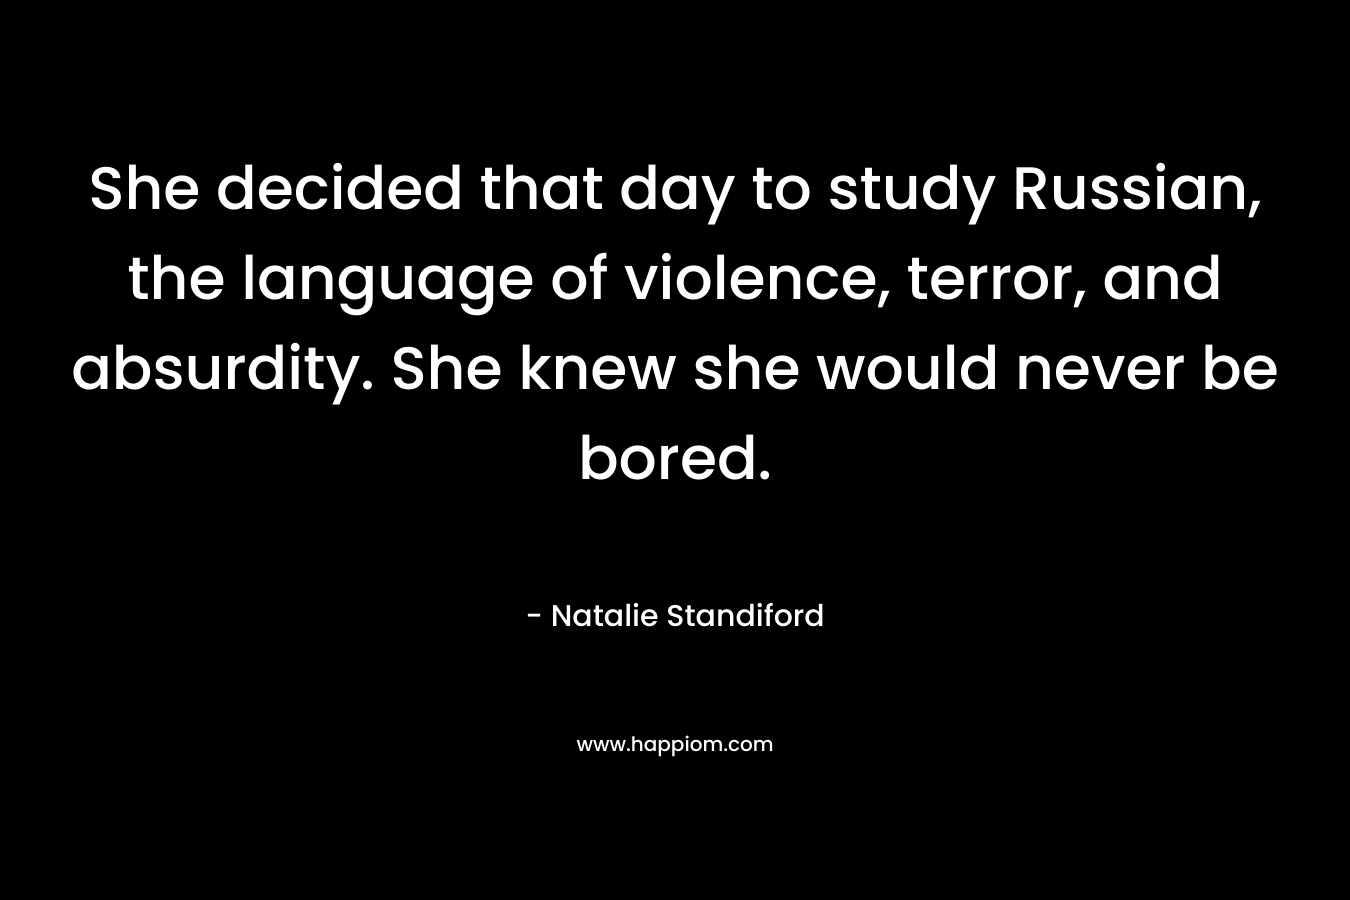 She decided that day to study Russian, the language of violence, terror, and absurdity. She knew she would never be bored. – Natalie Standiford